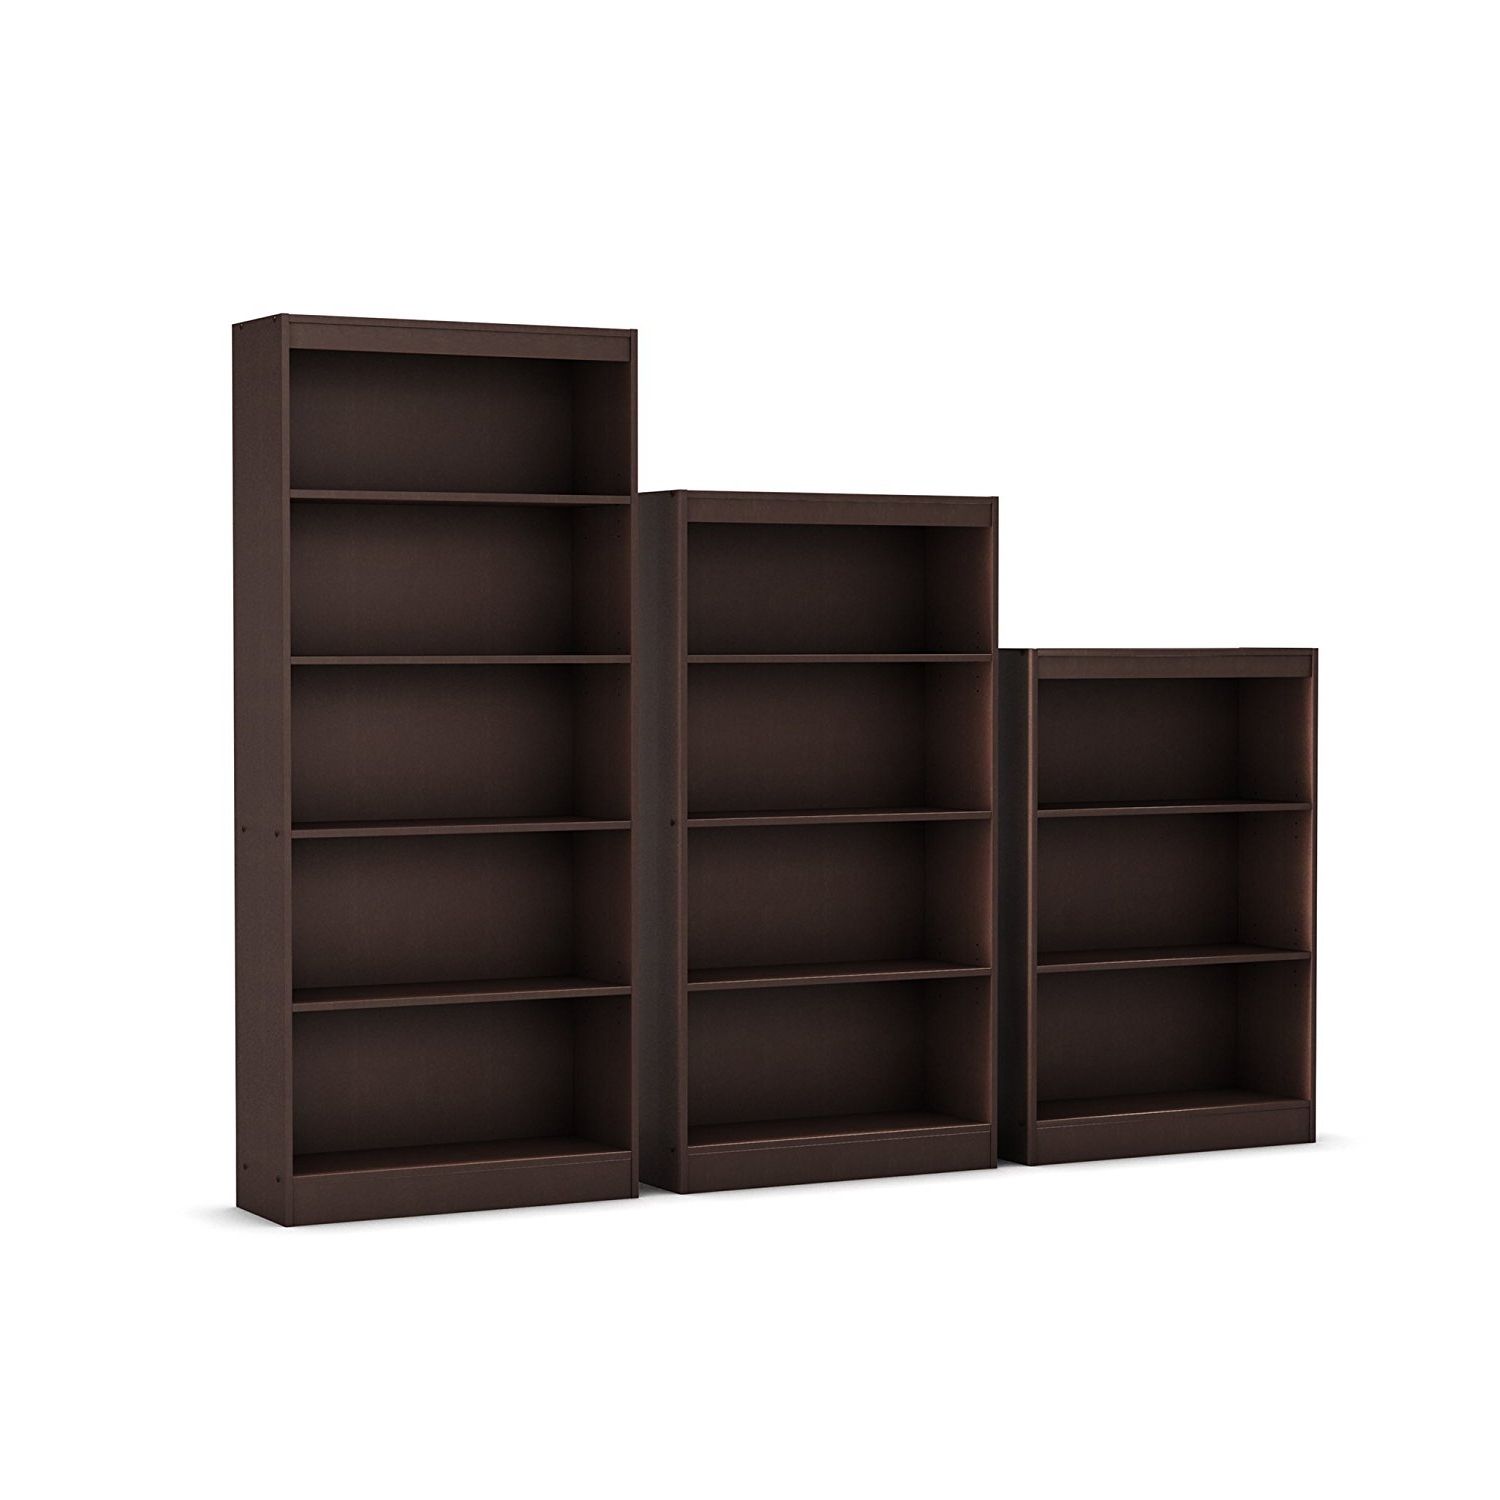 Most Popular Amazon: South Shore Axess Collection 4 Shelf Bookcase Pertaining To 4 Shelf Bookcases (View 3 of 15)